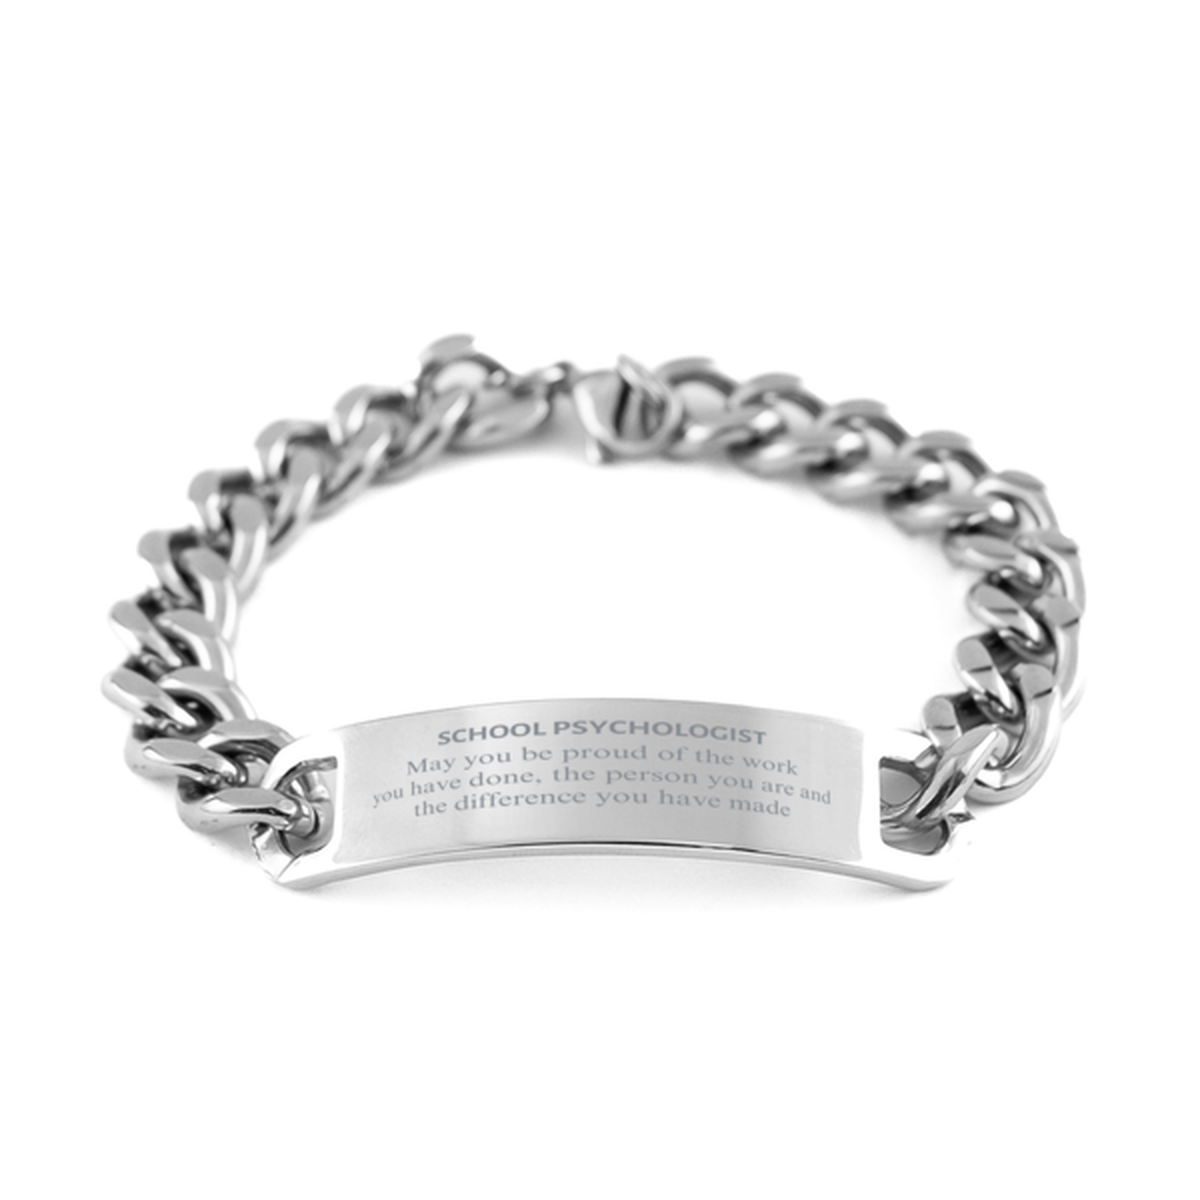 School Psychologist May you be proud of the work you have done, Retirement School Psychologist Cuban Chain Stainless Steel Bracelet for Colleague Appreciation Gifts Amazing for School Psychologist